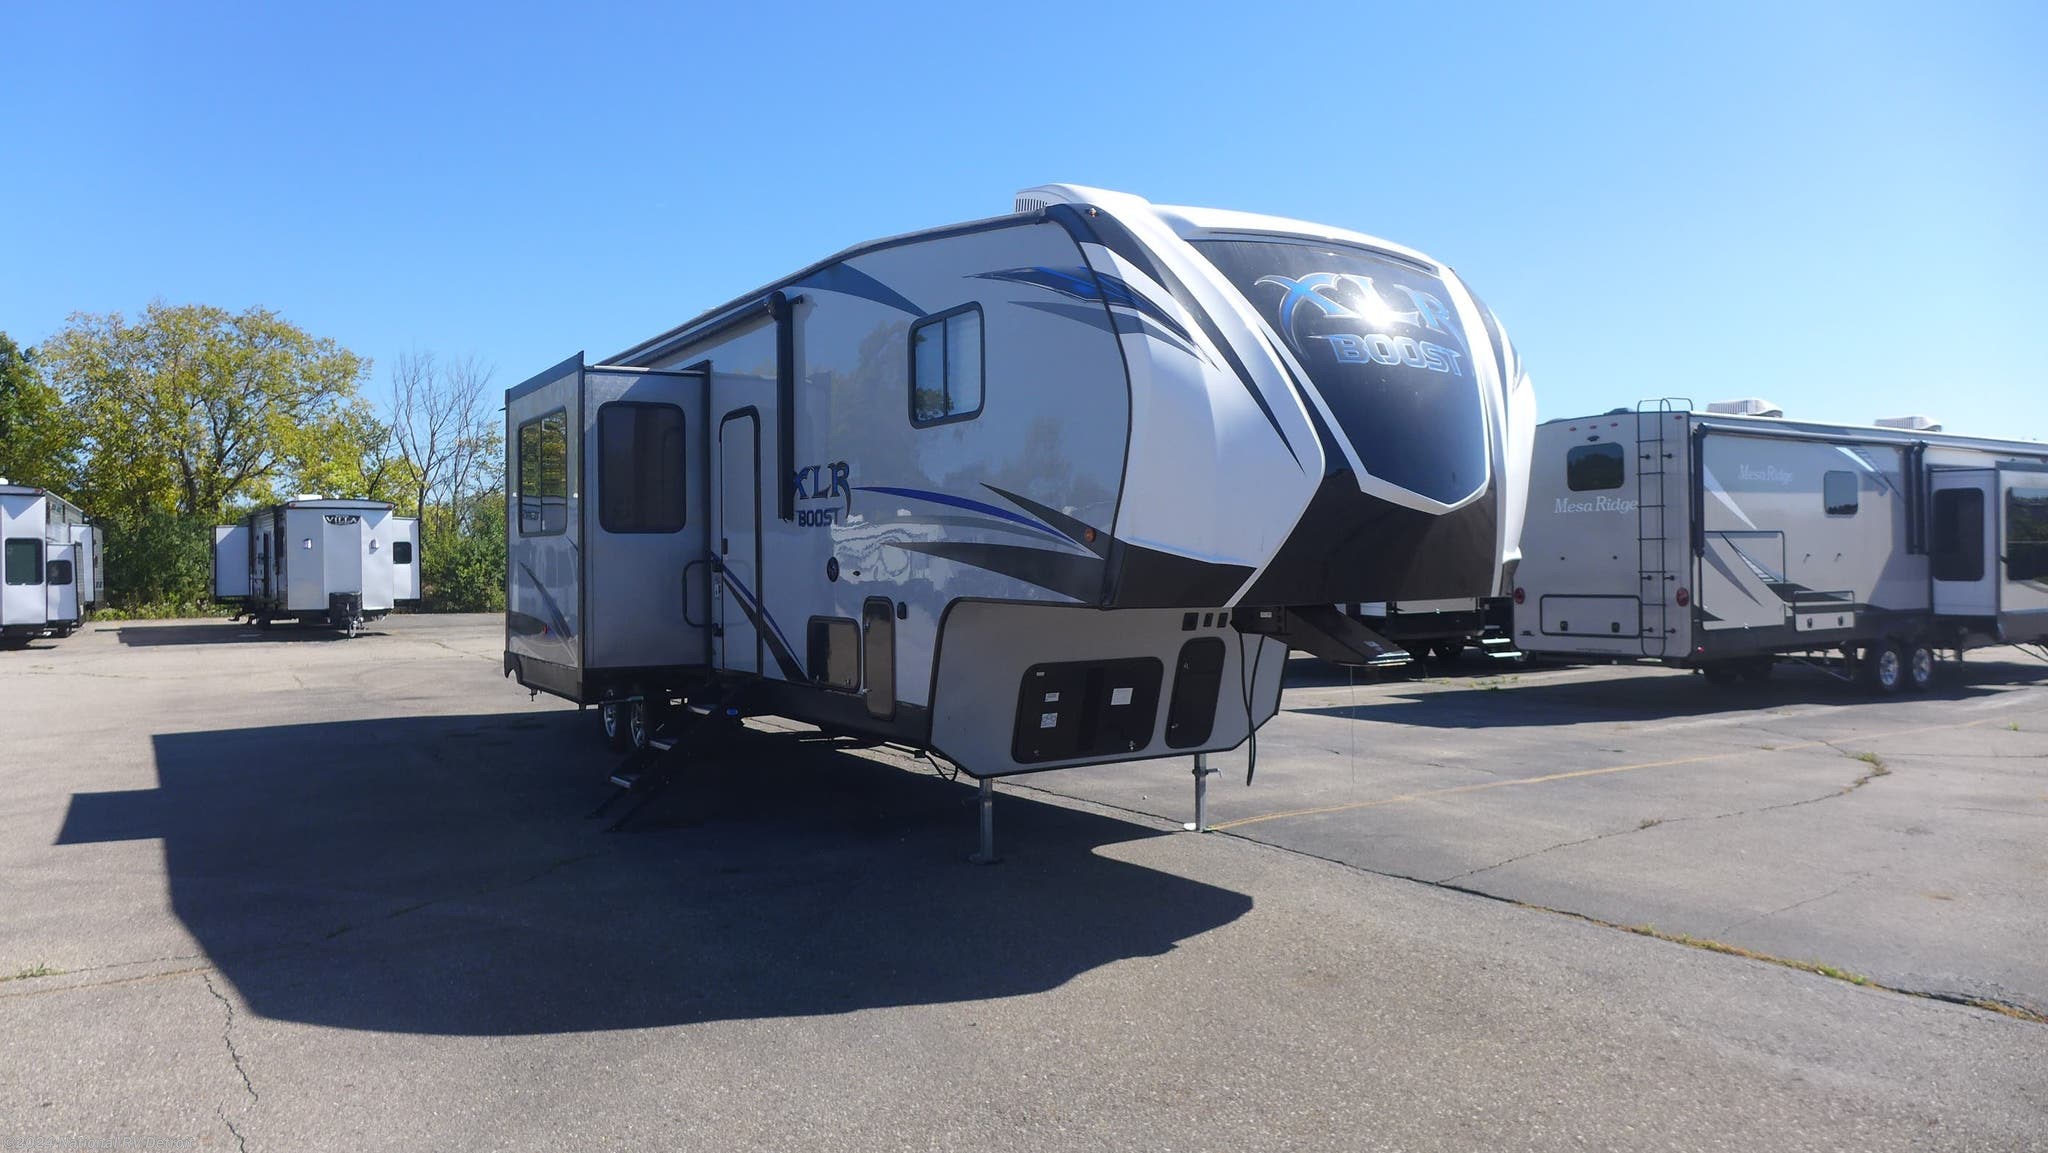 2019 Forest River XLR Boost 36DSX13 RV for Sale in Belleville, MI 48111 2019 Forest River Xlr Boost 36dsx13